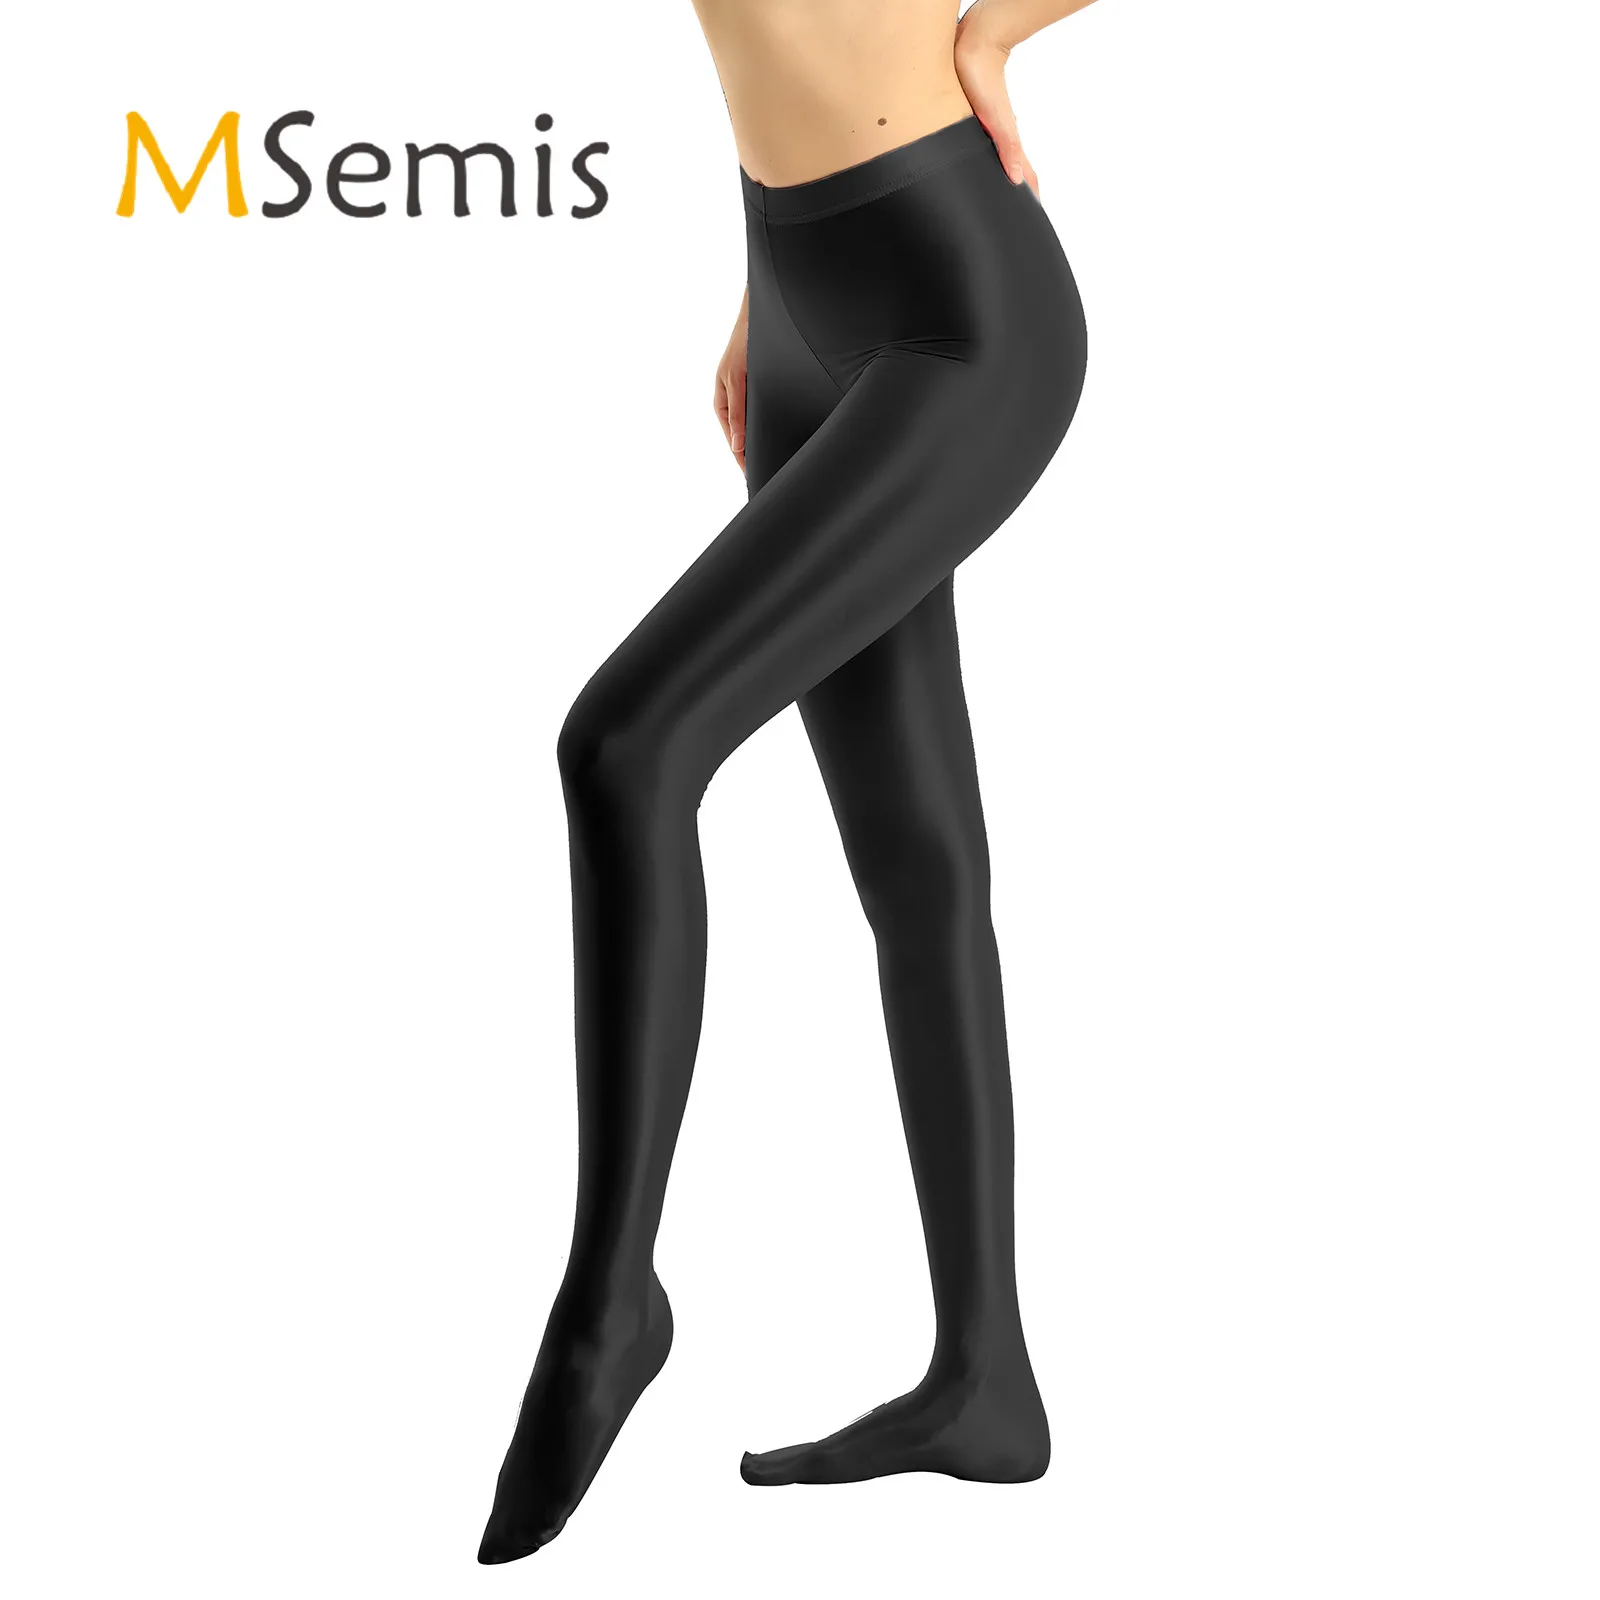 

Womens Glossy Sexy Tights Pantyhose Shiny High Waist Tights Stockings Training Pants Close-Fitting Sports Dancing Leggings